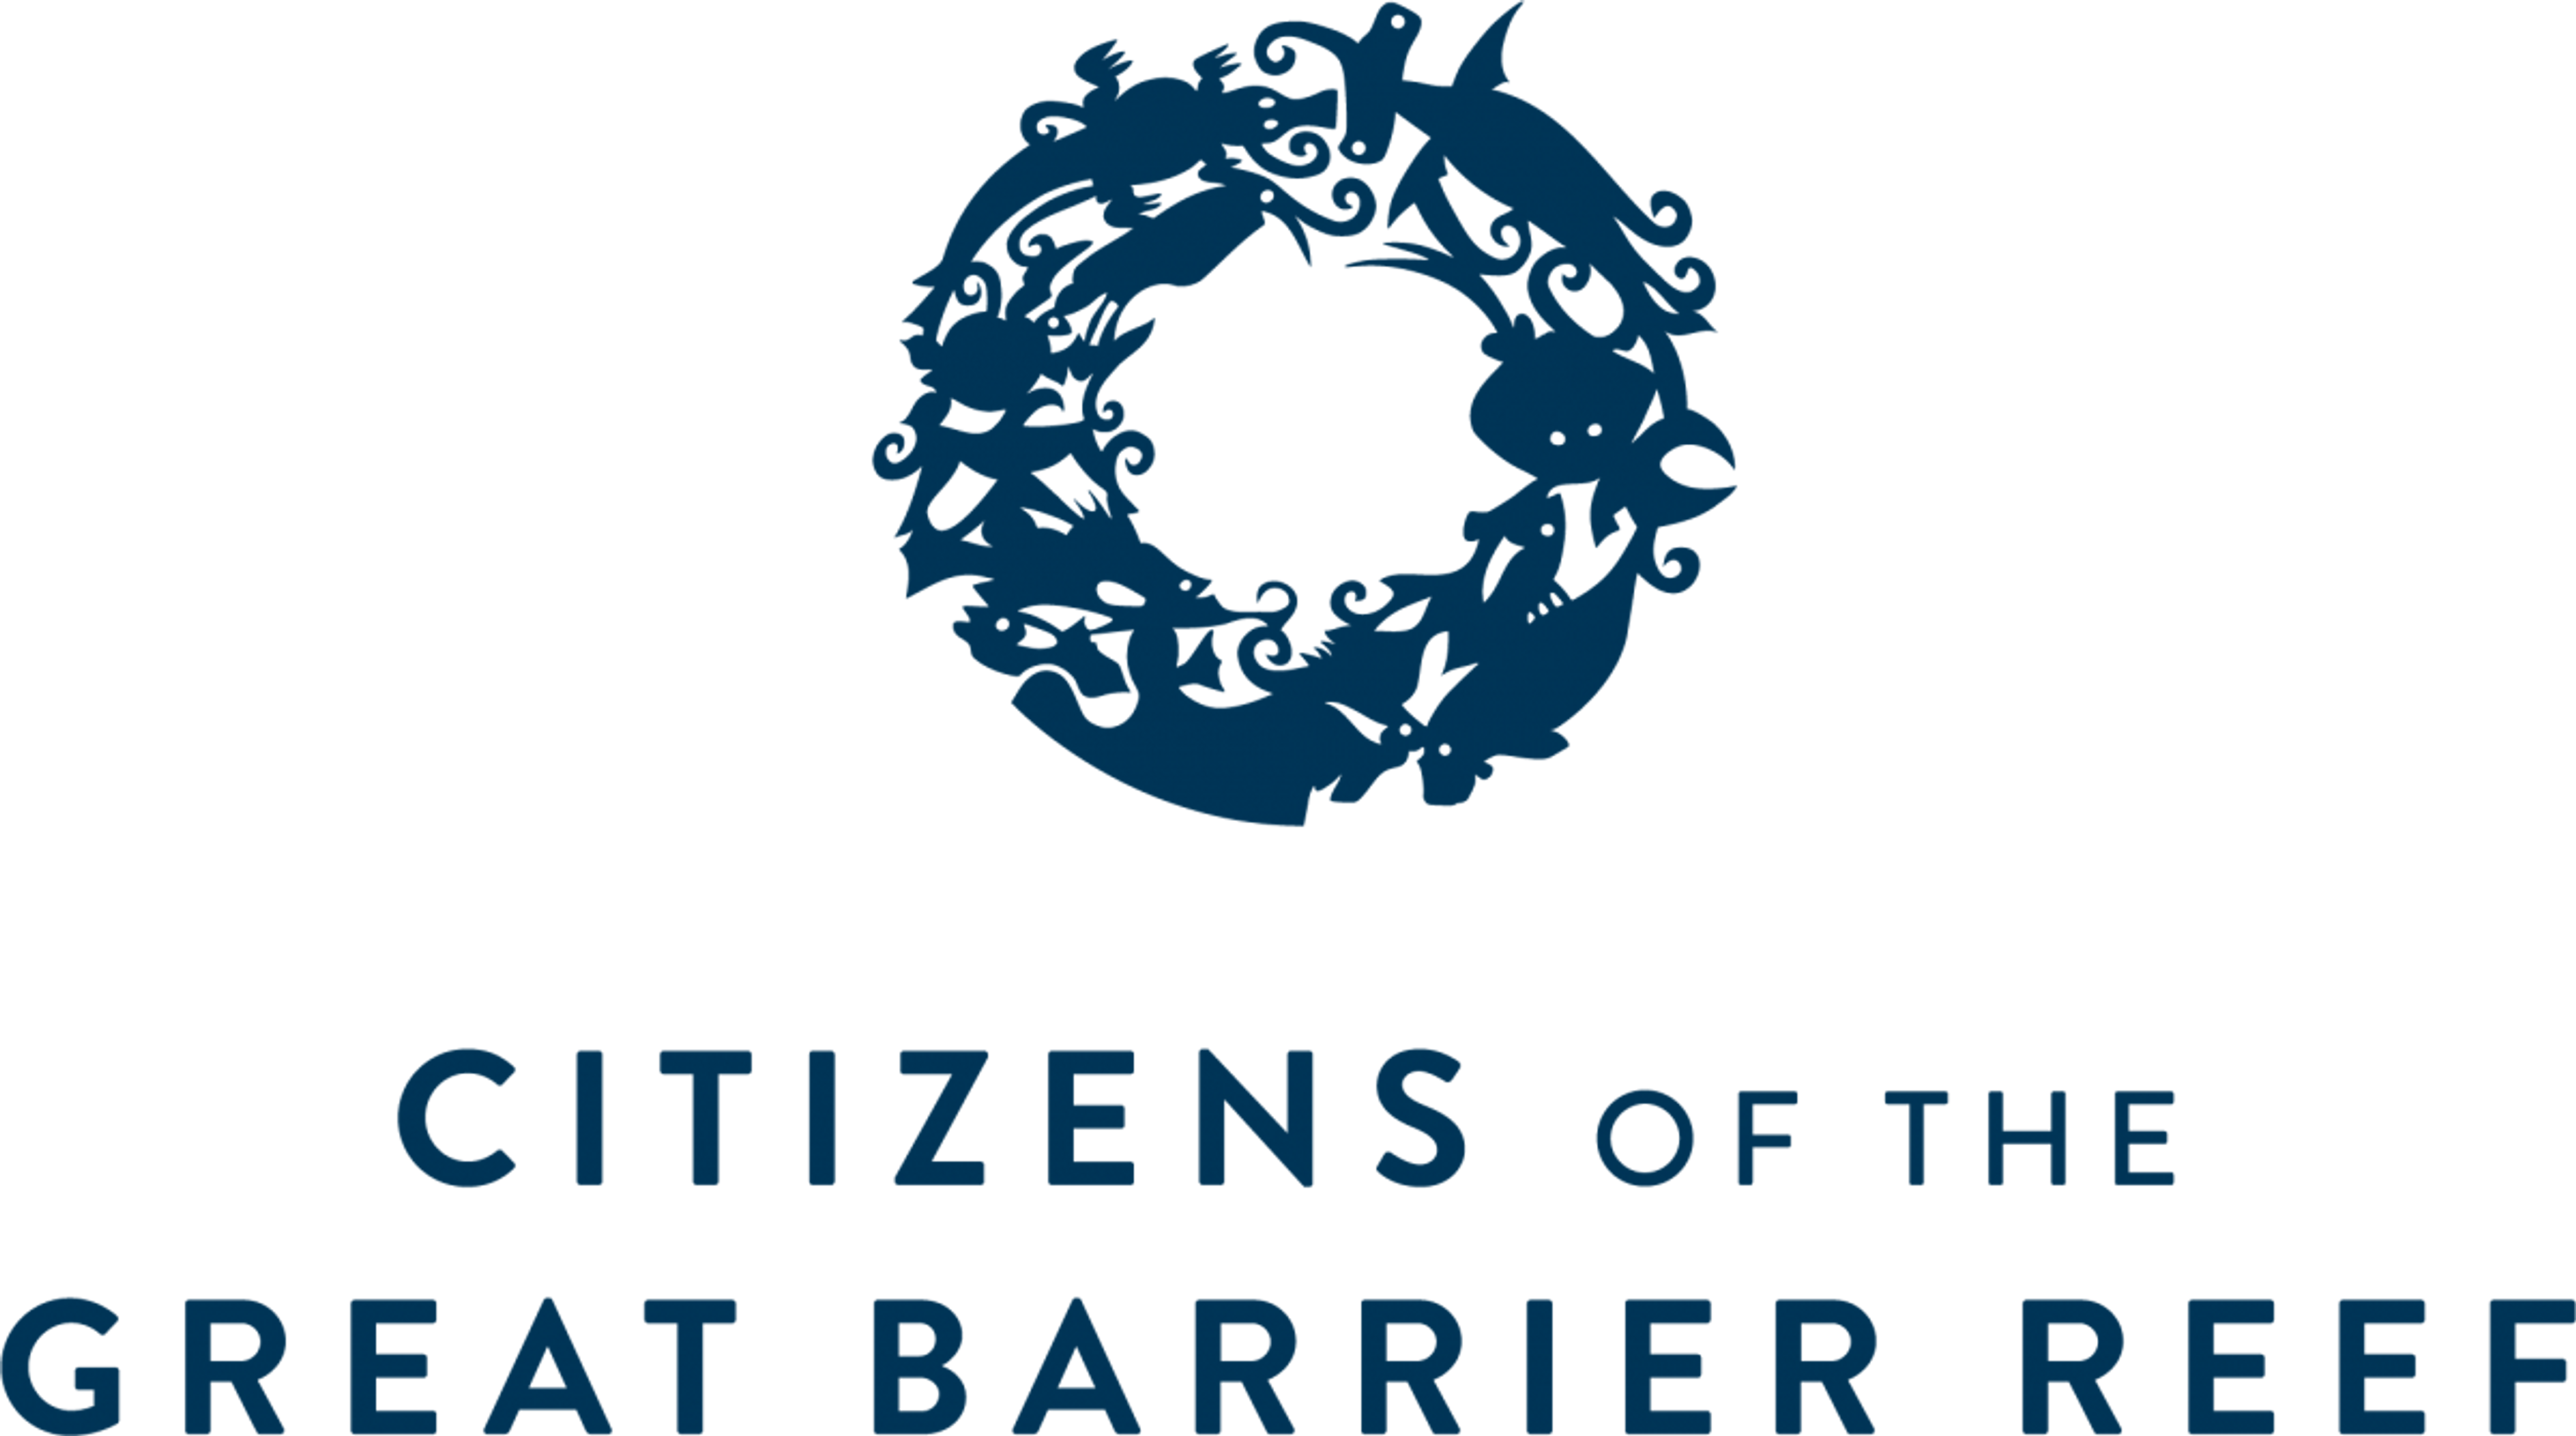 Citizens of the Great Barrier Reef